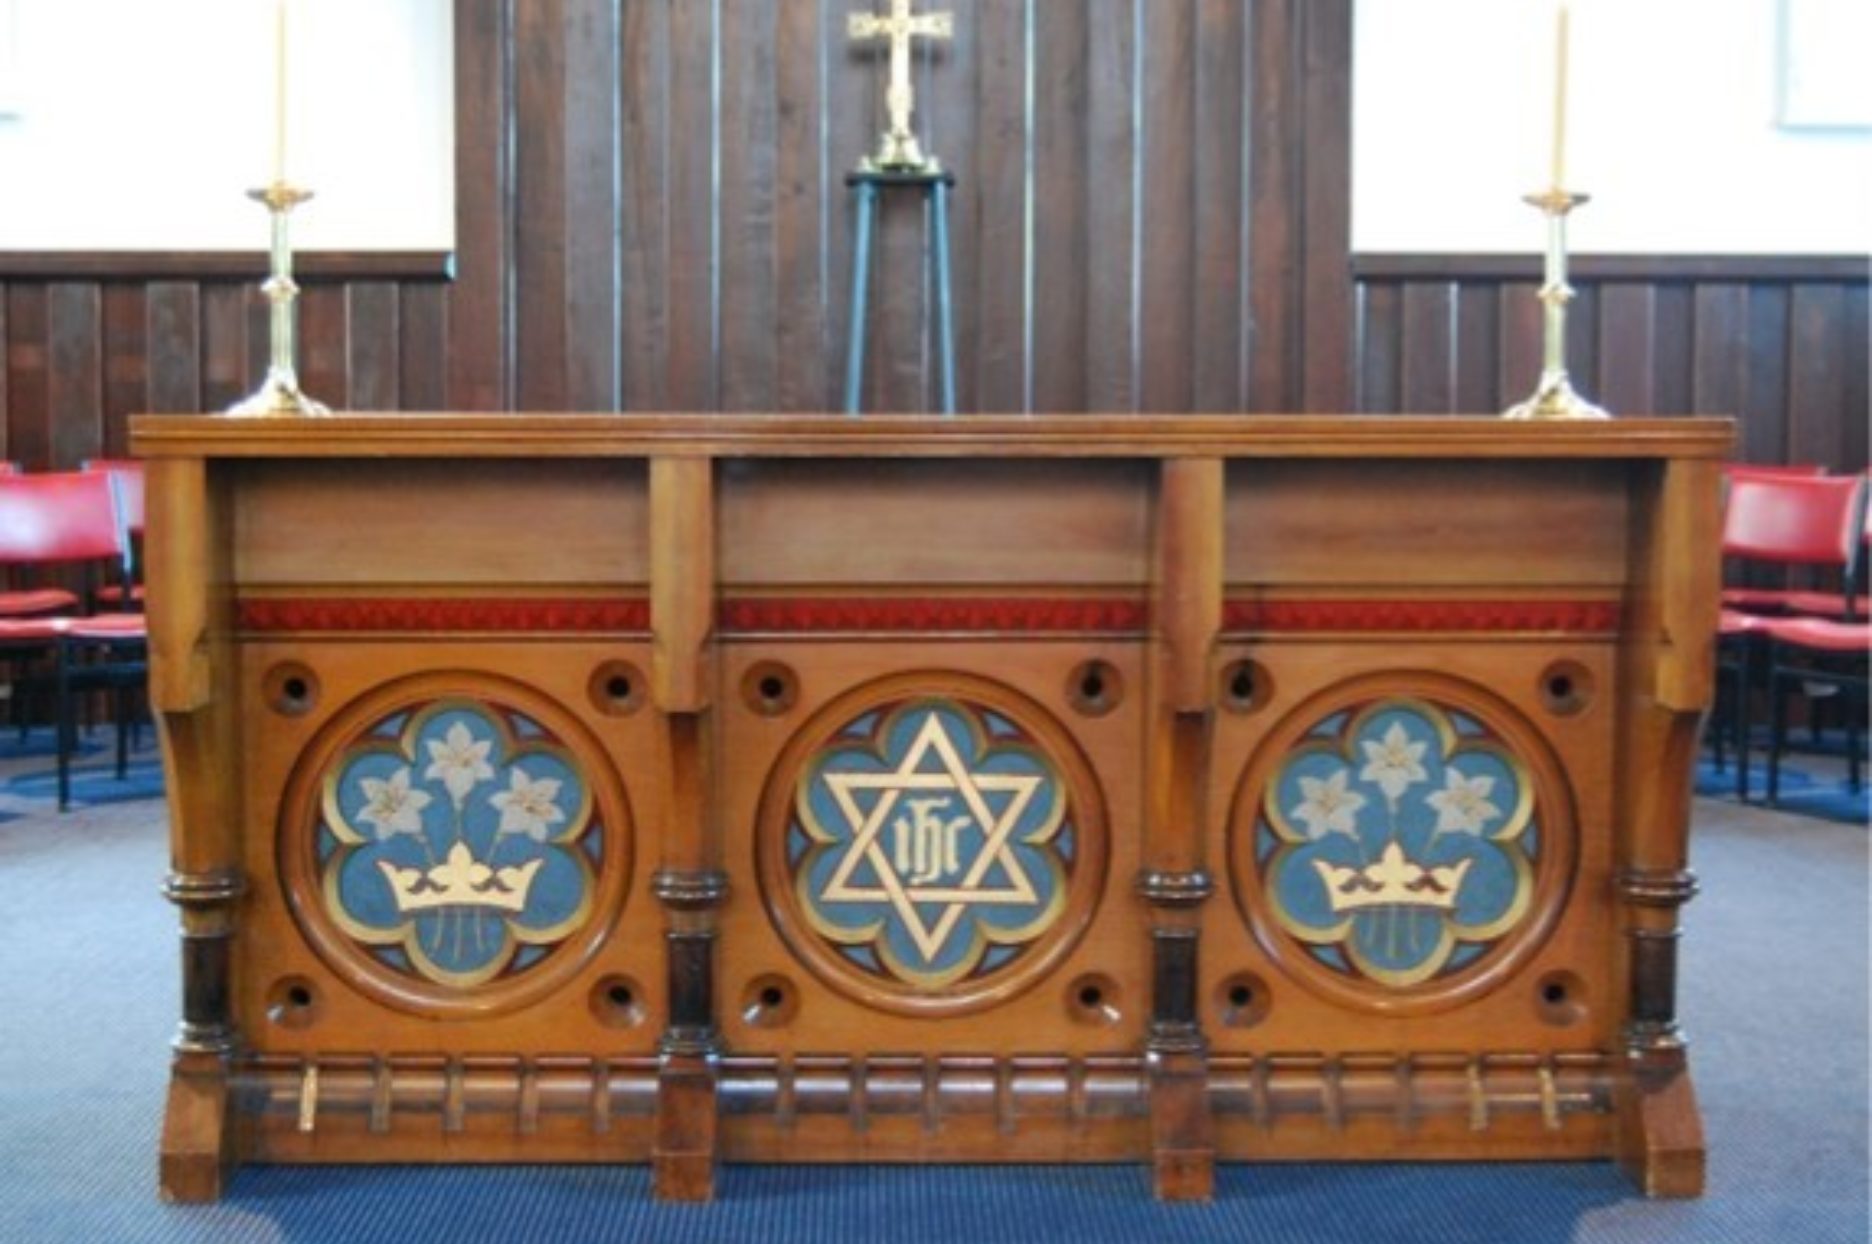 The altar formerly in Holy Trinity, now installed in St Saviour’s at Holy Trinity.